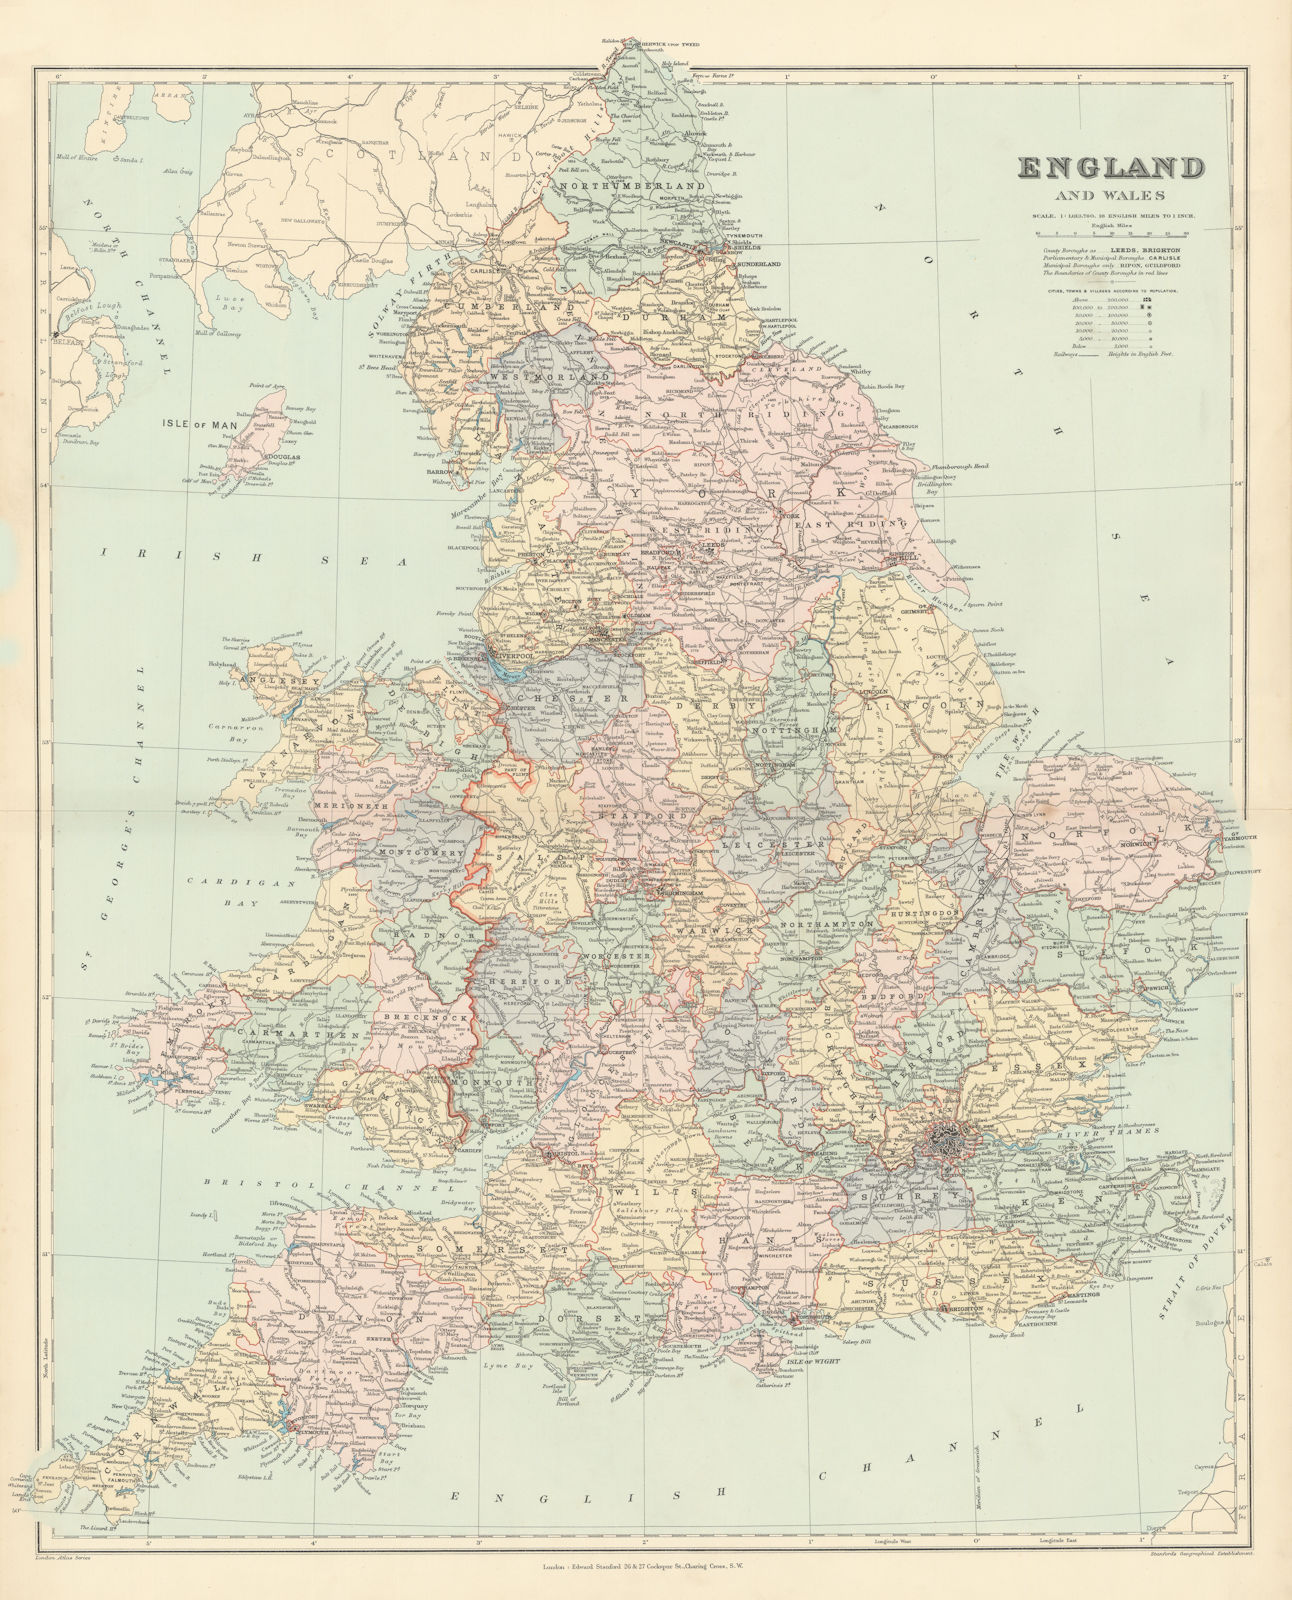 England and Wales in counties. Railways. Large 68x55cm. STANFORD 1896 old map